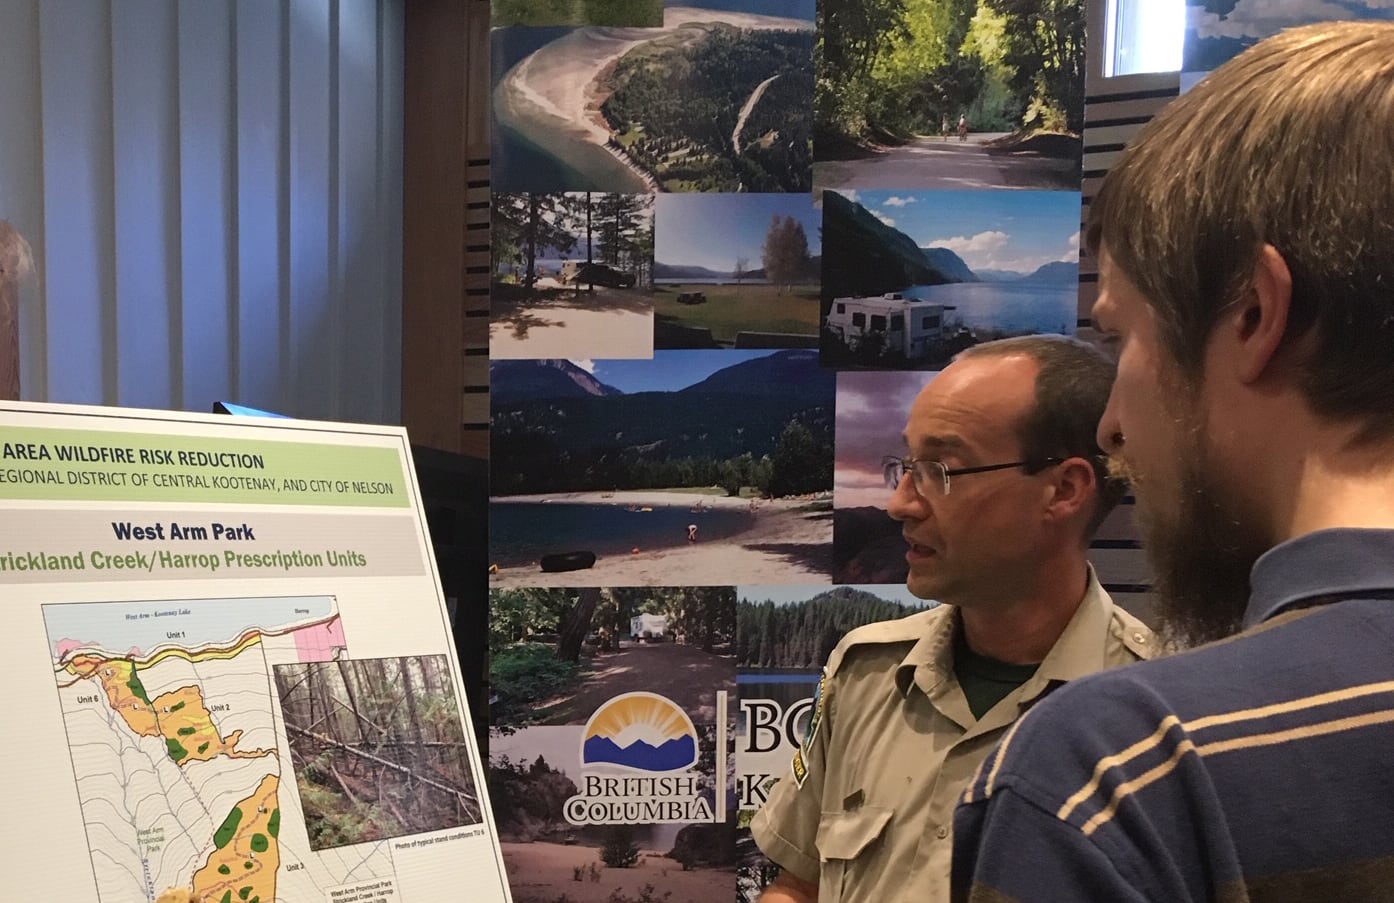 Wildfire Risk Reduction Open House gives public information to protect homes